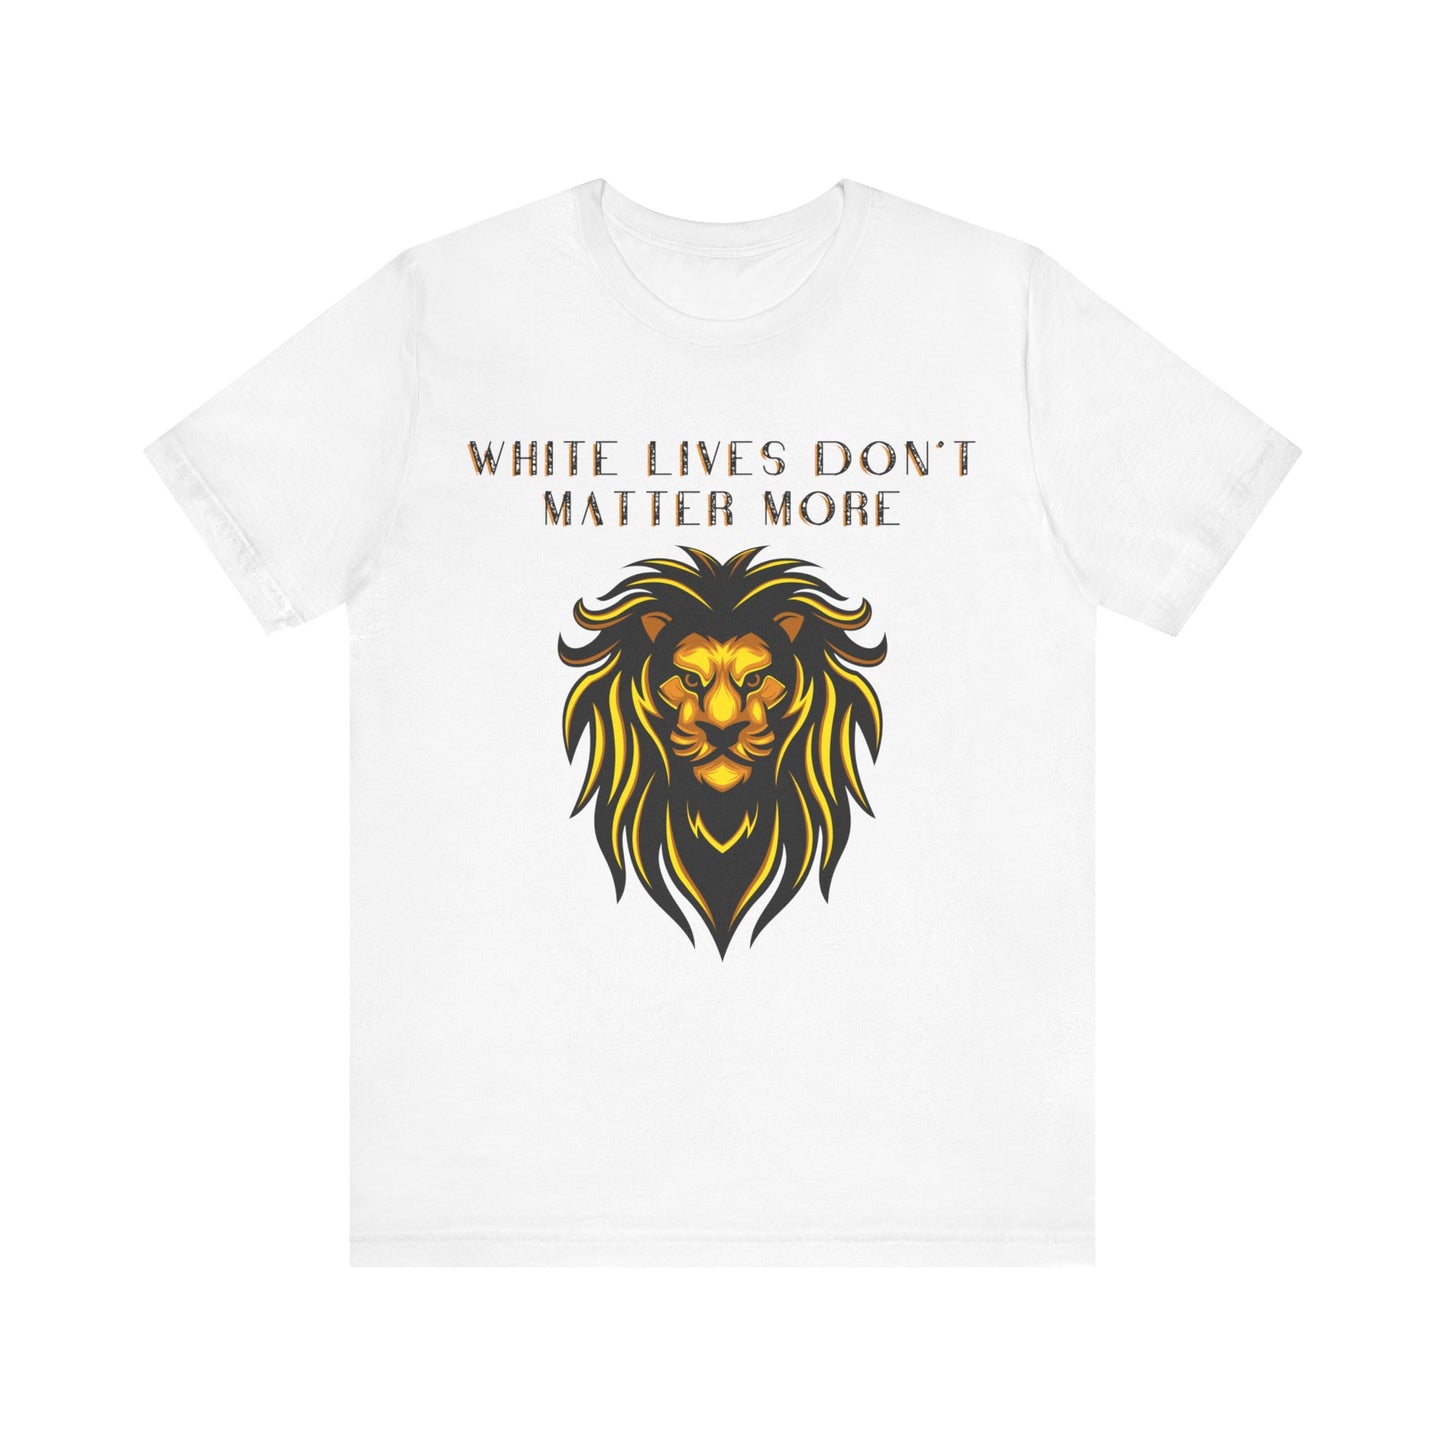 "White Lives Don't Matter More" White Short-Sleeve Jersey T-Shirt with Bold White Text and Lion Graphic